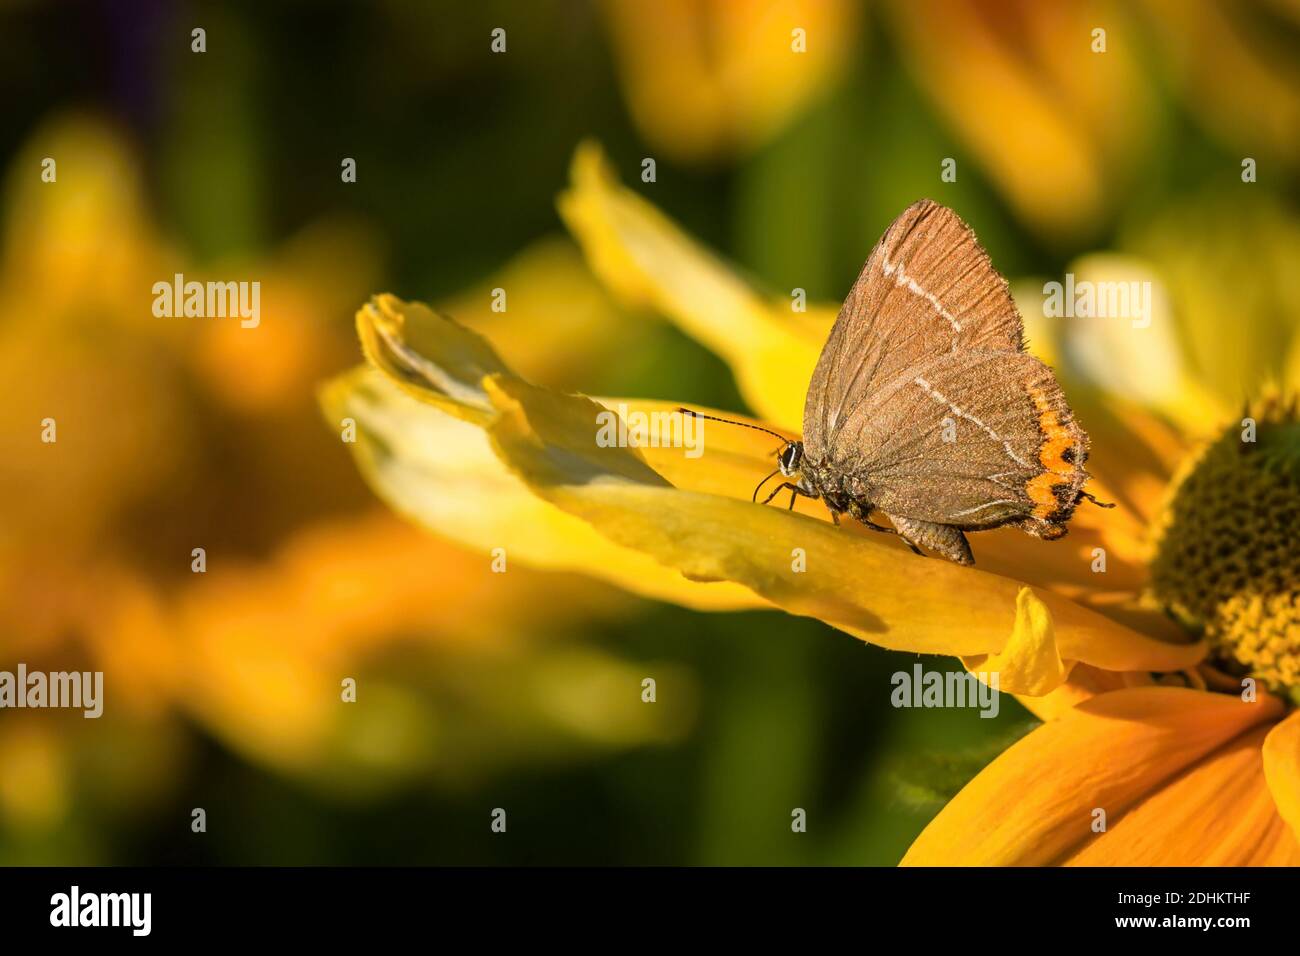 Close up image of a small brown butterfly, Satyrium w-album, sitting on a yellow flower growing in a garden. Sunny summer day. Blurry background. Stock Photo